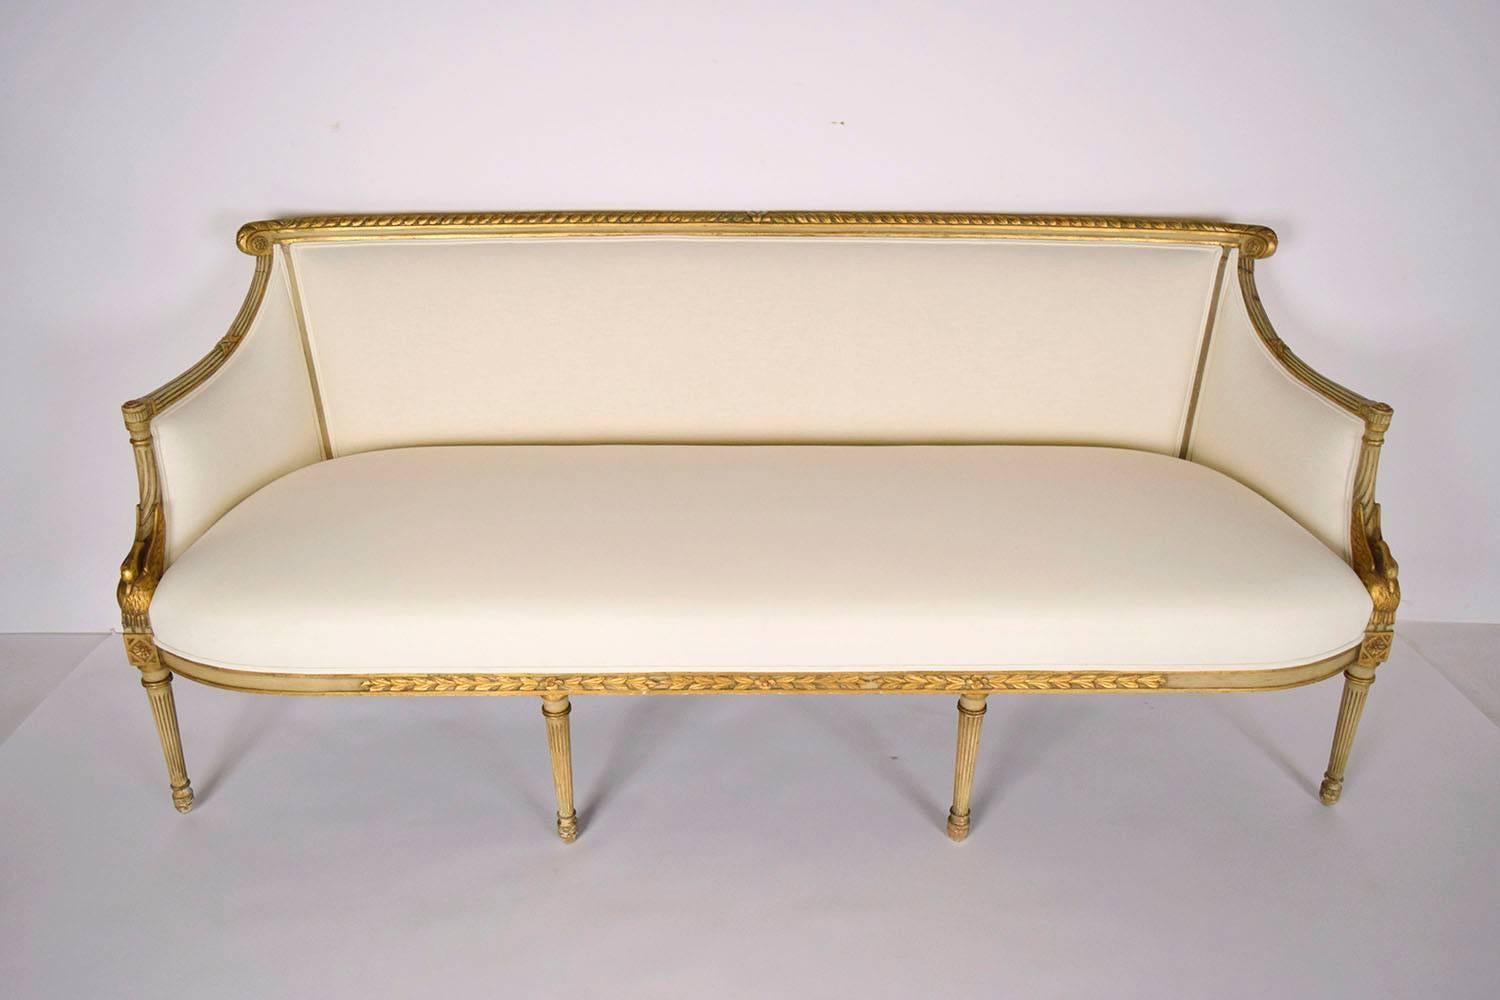 This one of a kind 1890's French Empire sofa features a solid wood frame with its original paint and a gilt finish. There are beautiful carvings throughout the frame with a laurel leaf trim, a swan resting at the bottom each arm, rosettes at the top